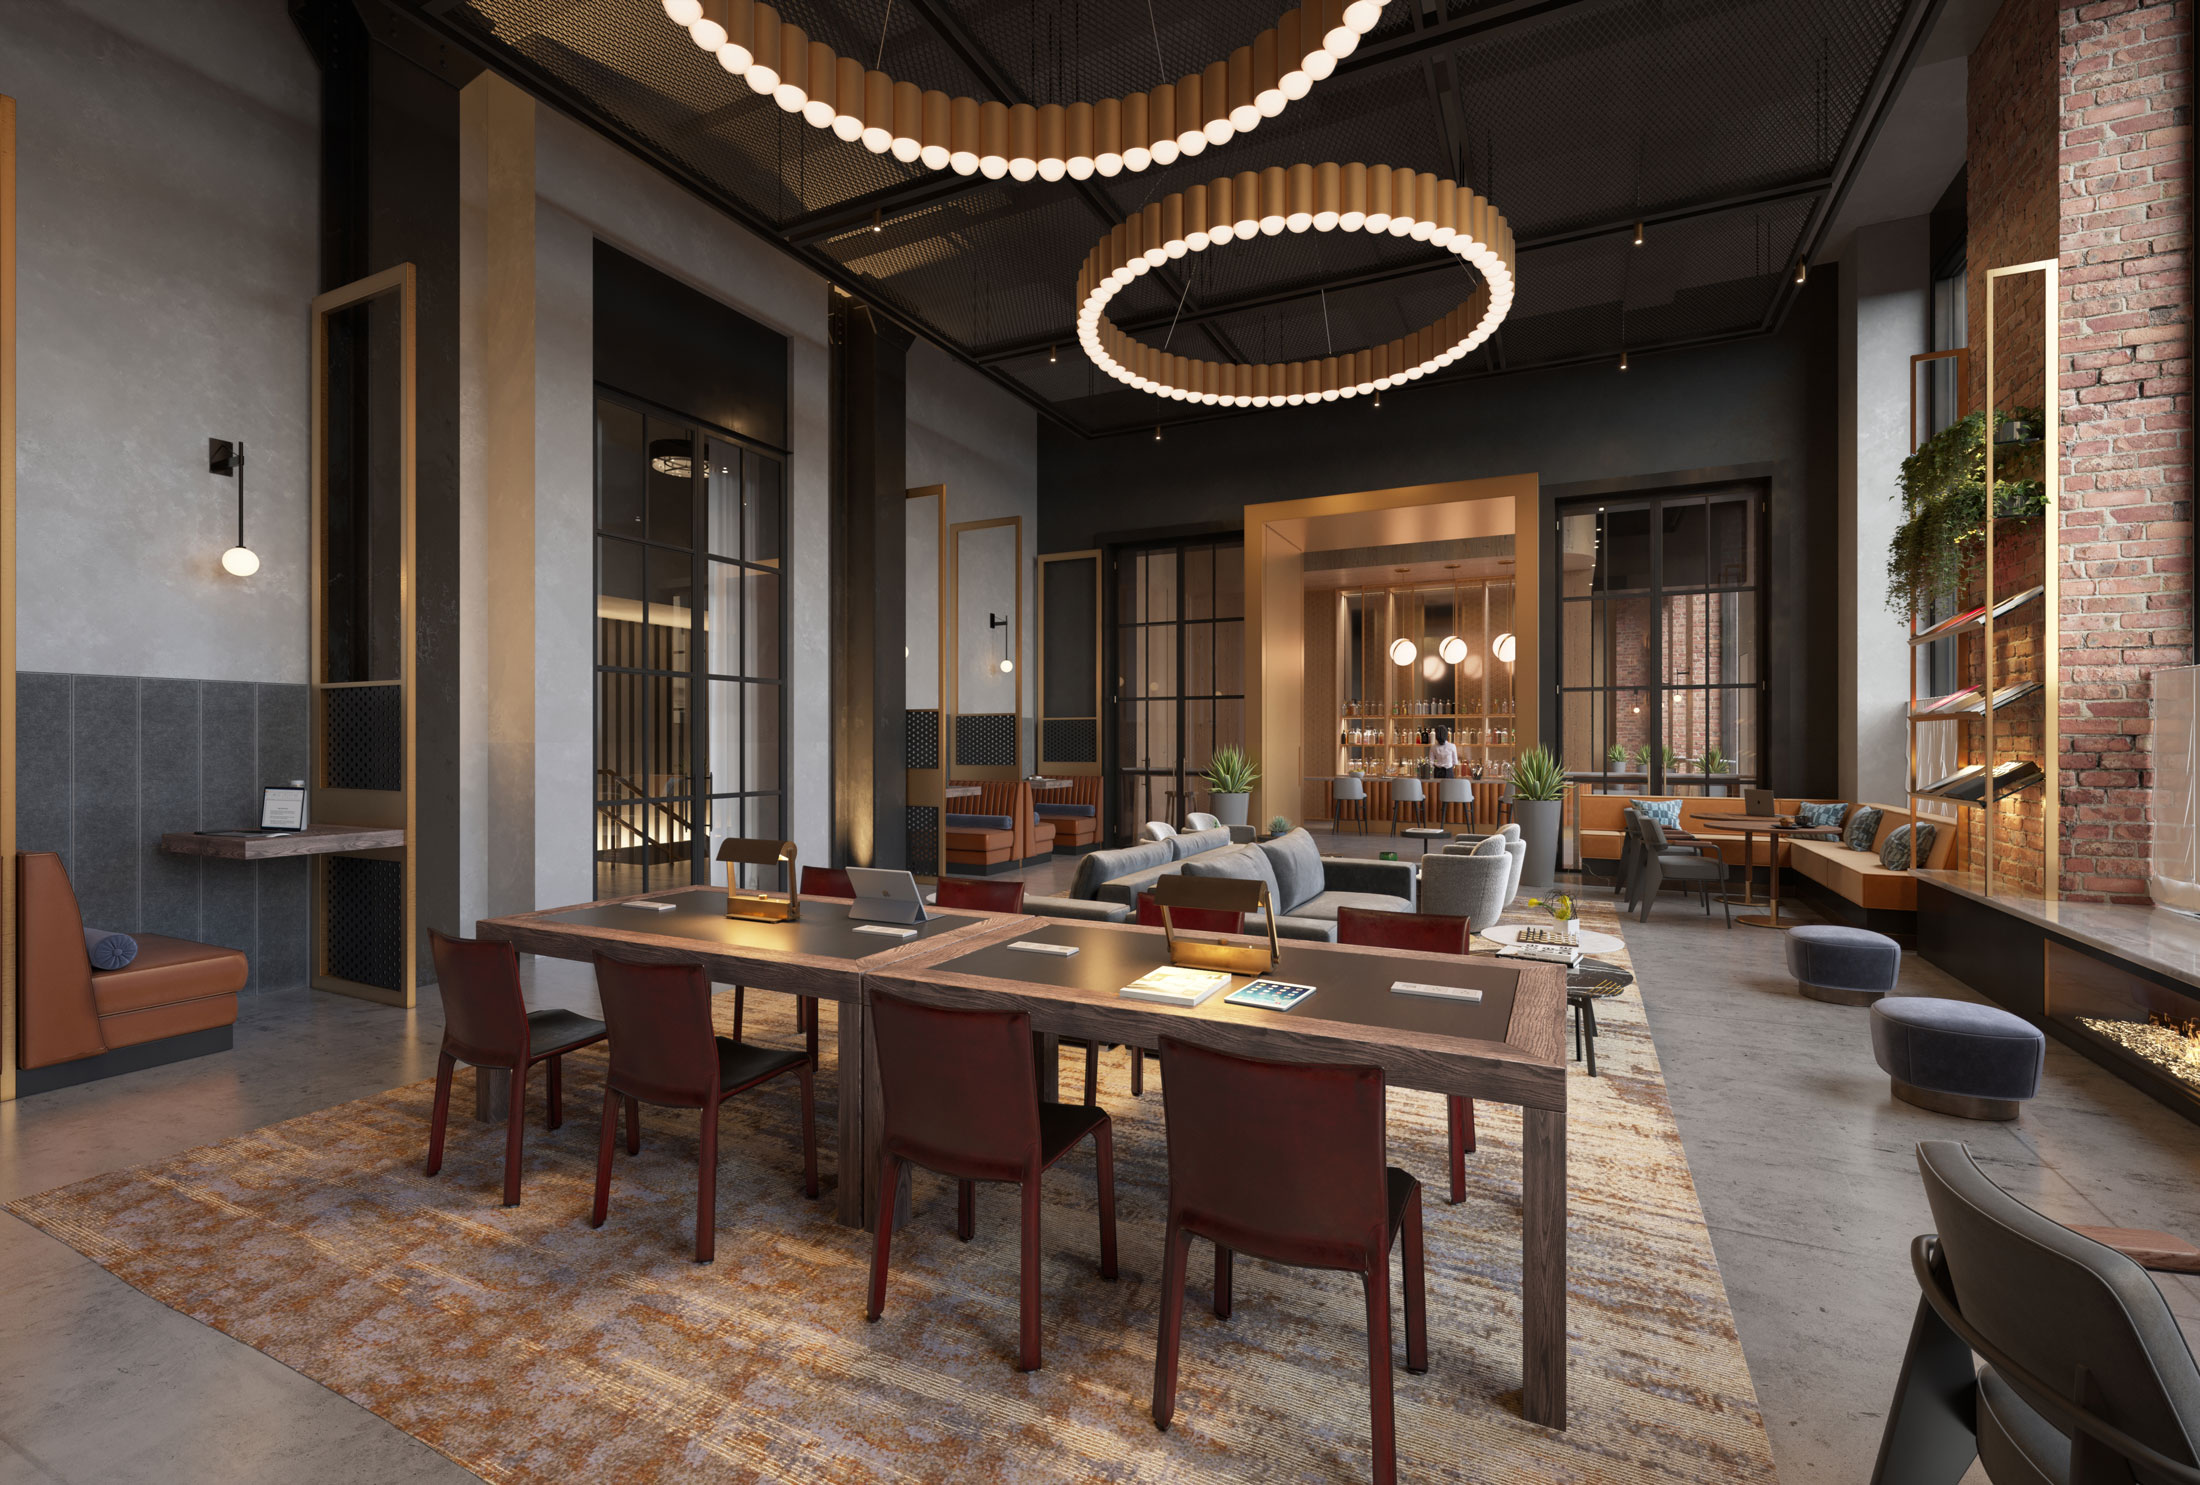 Architectural Rendering of the lounge of the 149 Madison project located in New York City